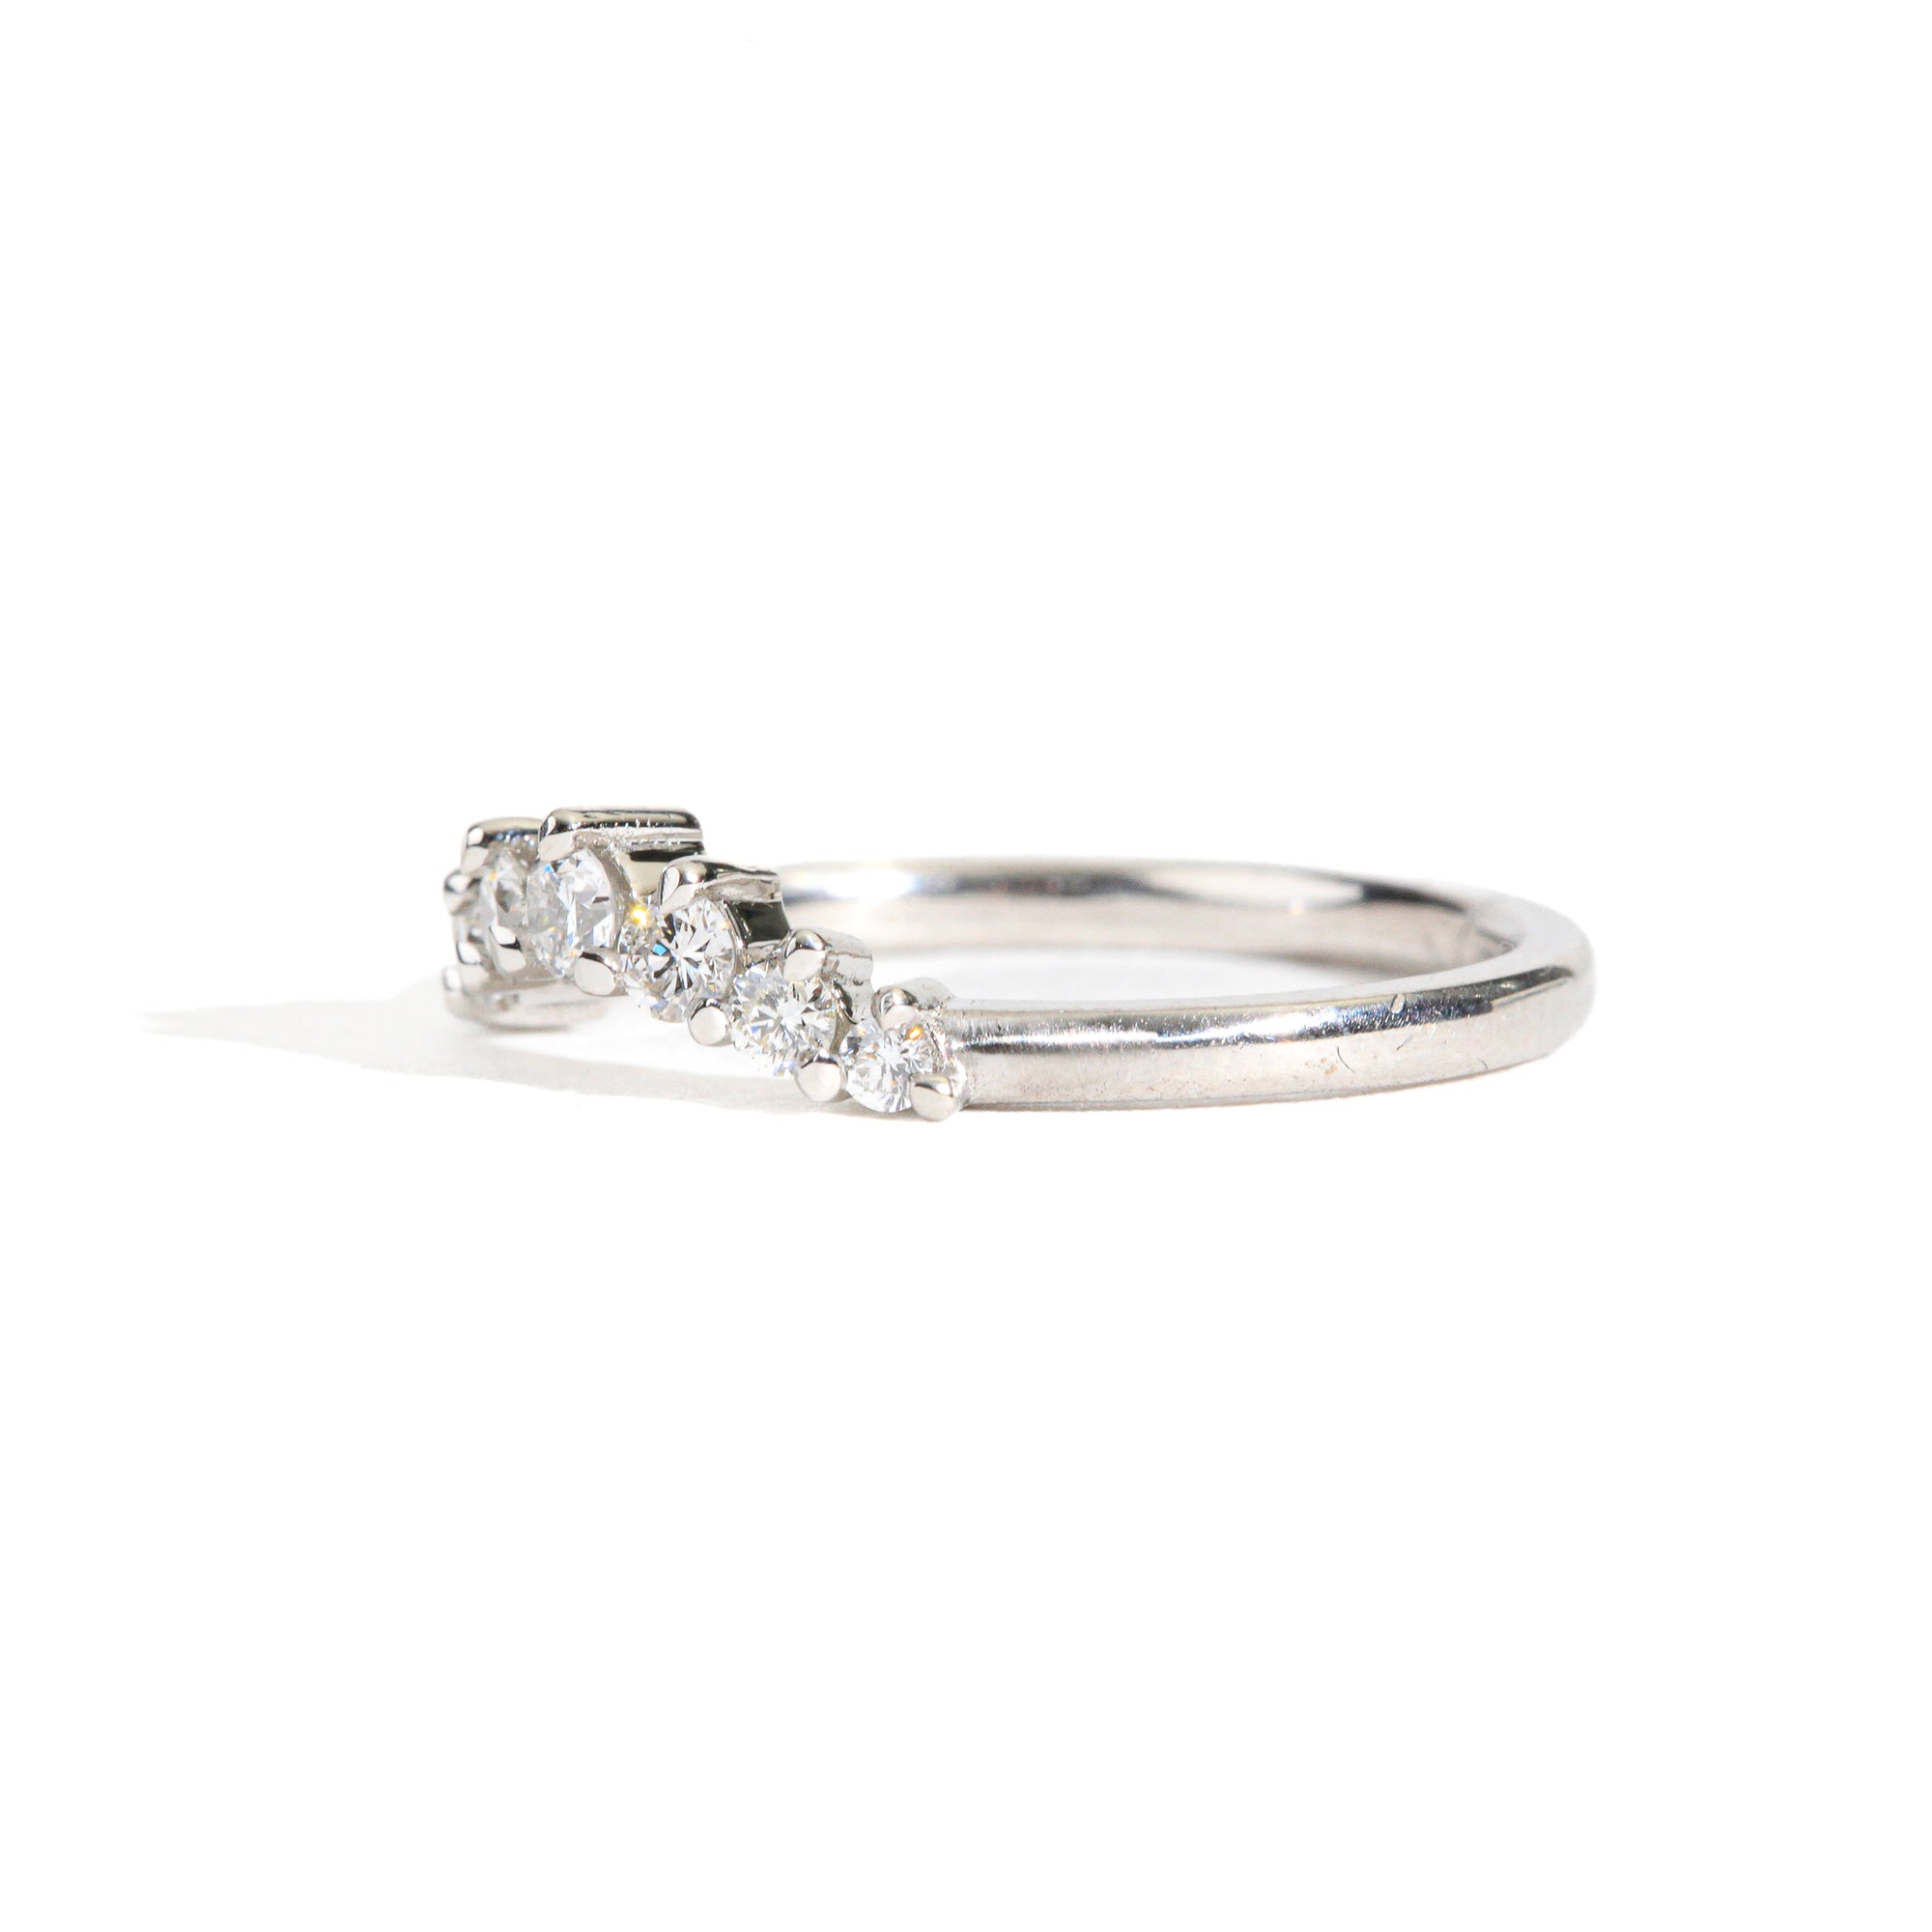 18 carat white gold woman's wedding band with 7 round white diamonds, claw set in a slight curve.